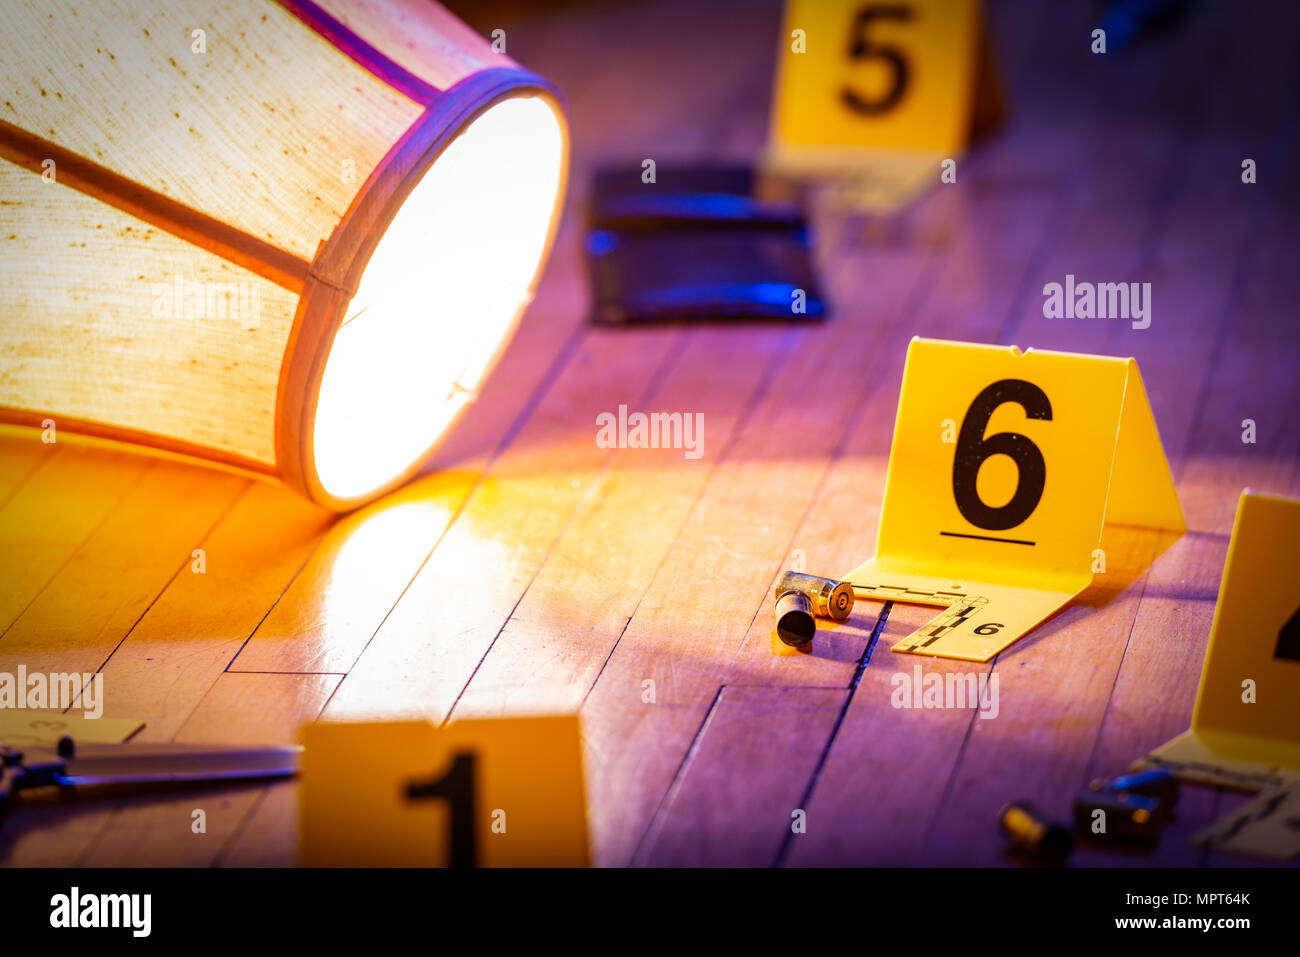 Evidence is marked with evidence markers on the floor of a home. A knocked over lamp lays nearby. Stock Photo